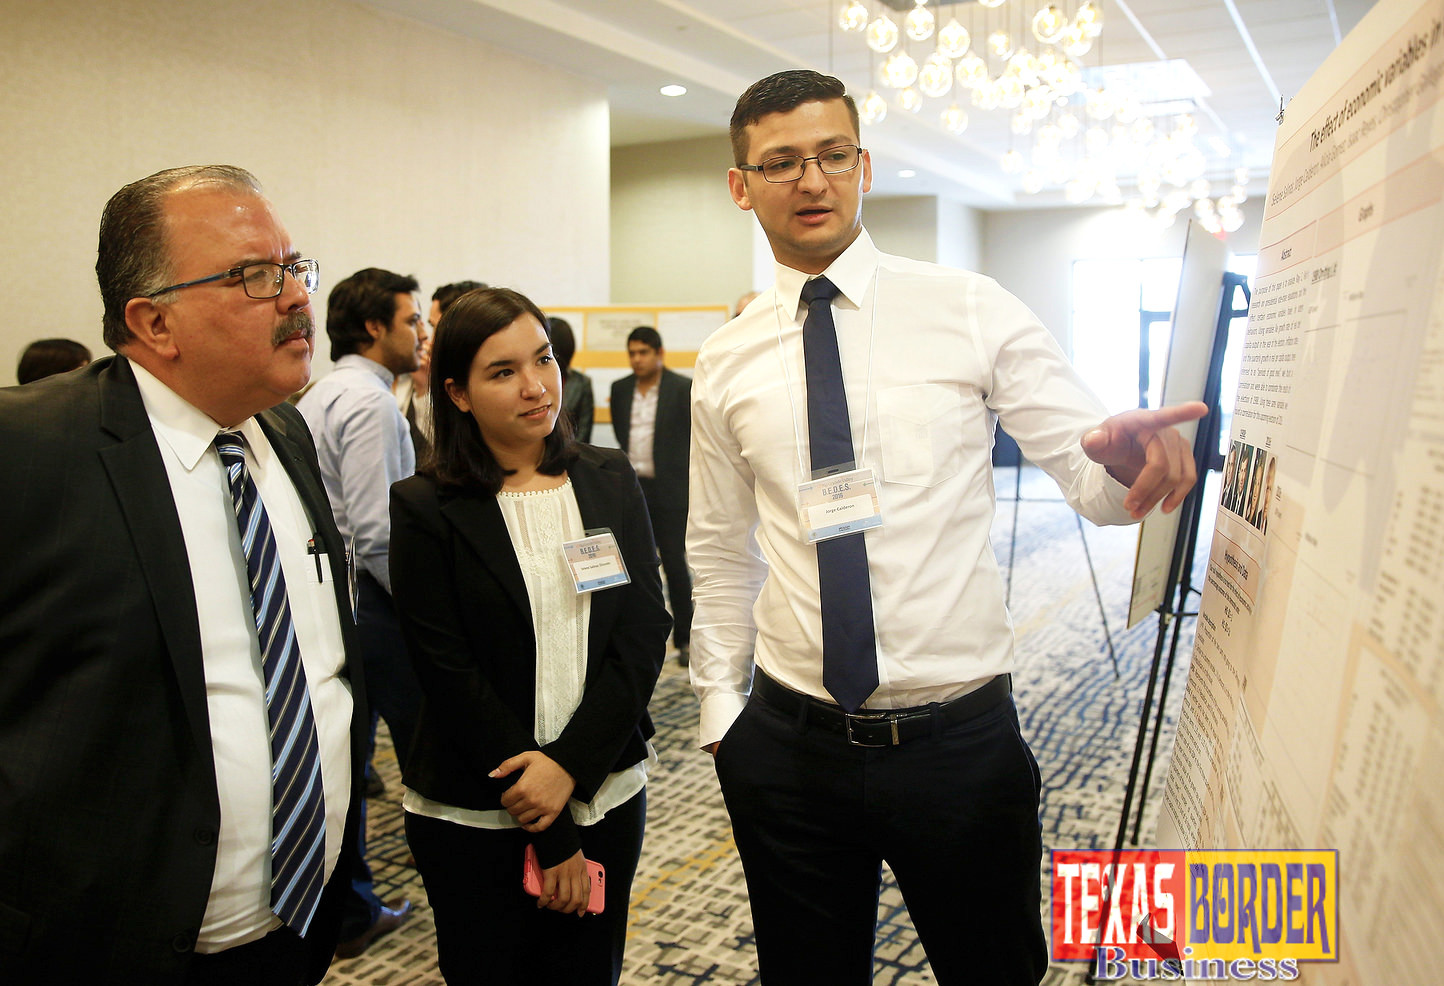 UTRGV students Selene Salinas and Jorge Calderon present their research on the effect of economic variables in voting behaviors, during the Border Economic Development & Entrepreneurship Symposium (BEDES) on Wednesday, Nov. 9, 2016, at the Embassy Suites McAllen Convention Center. The symposium was organized by the UTRGV Robert C. Vackar College of Business & Entrepreneurship, the Federal Reserve Bank of Dallas and the McAllen Chamber of Commerce. (UTRGV Photo by Paul Chouy)